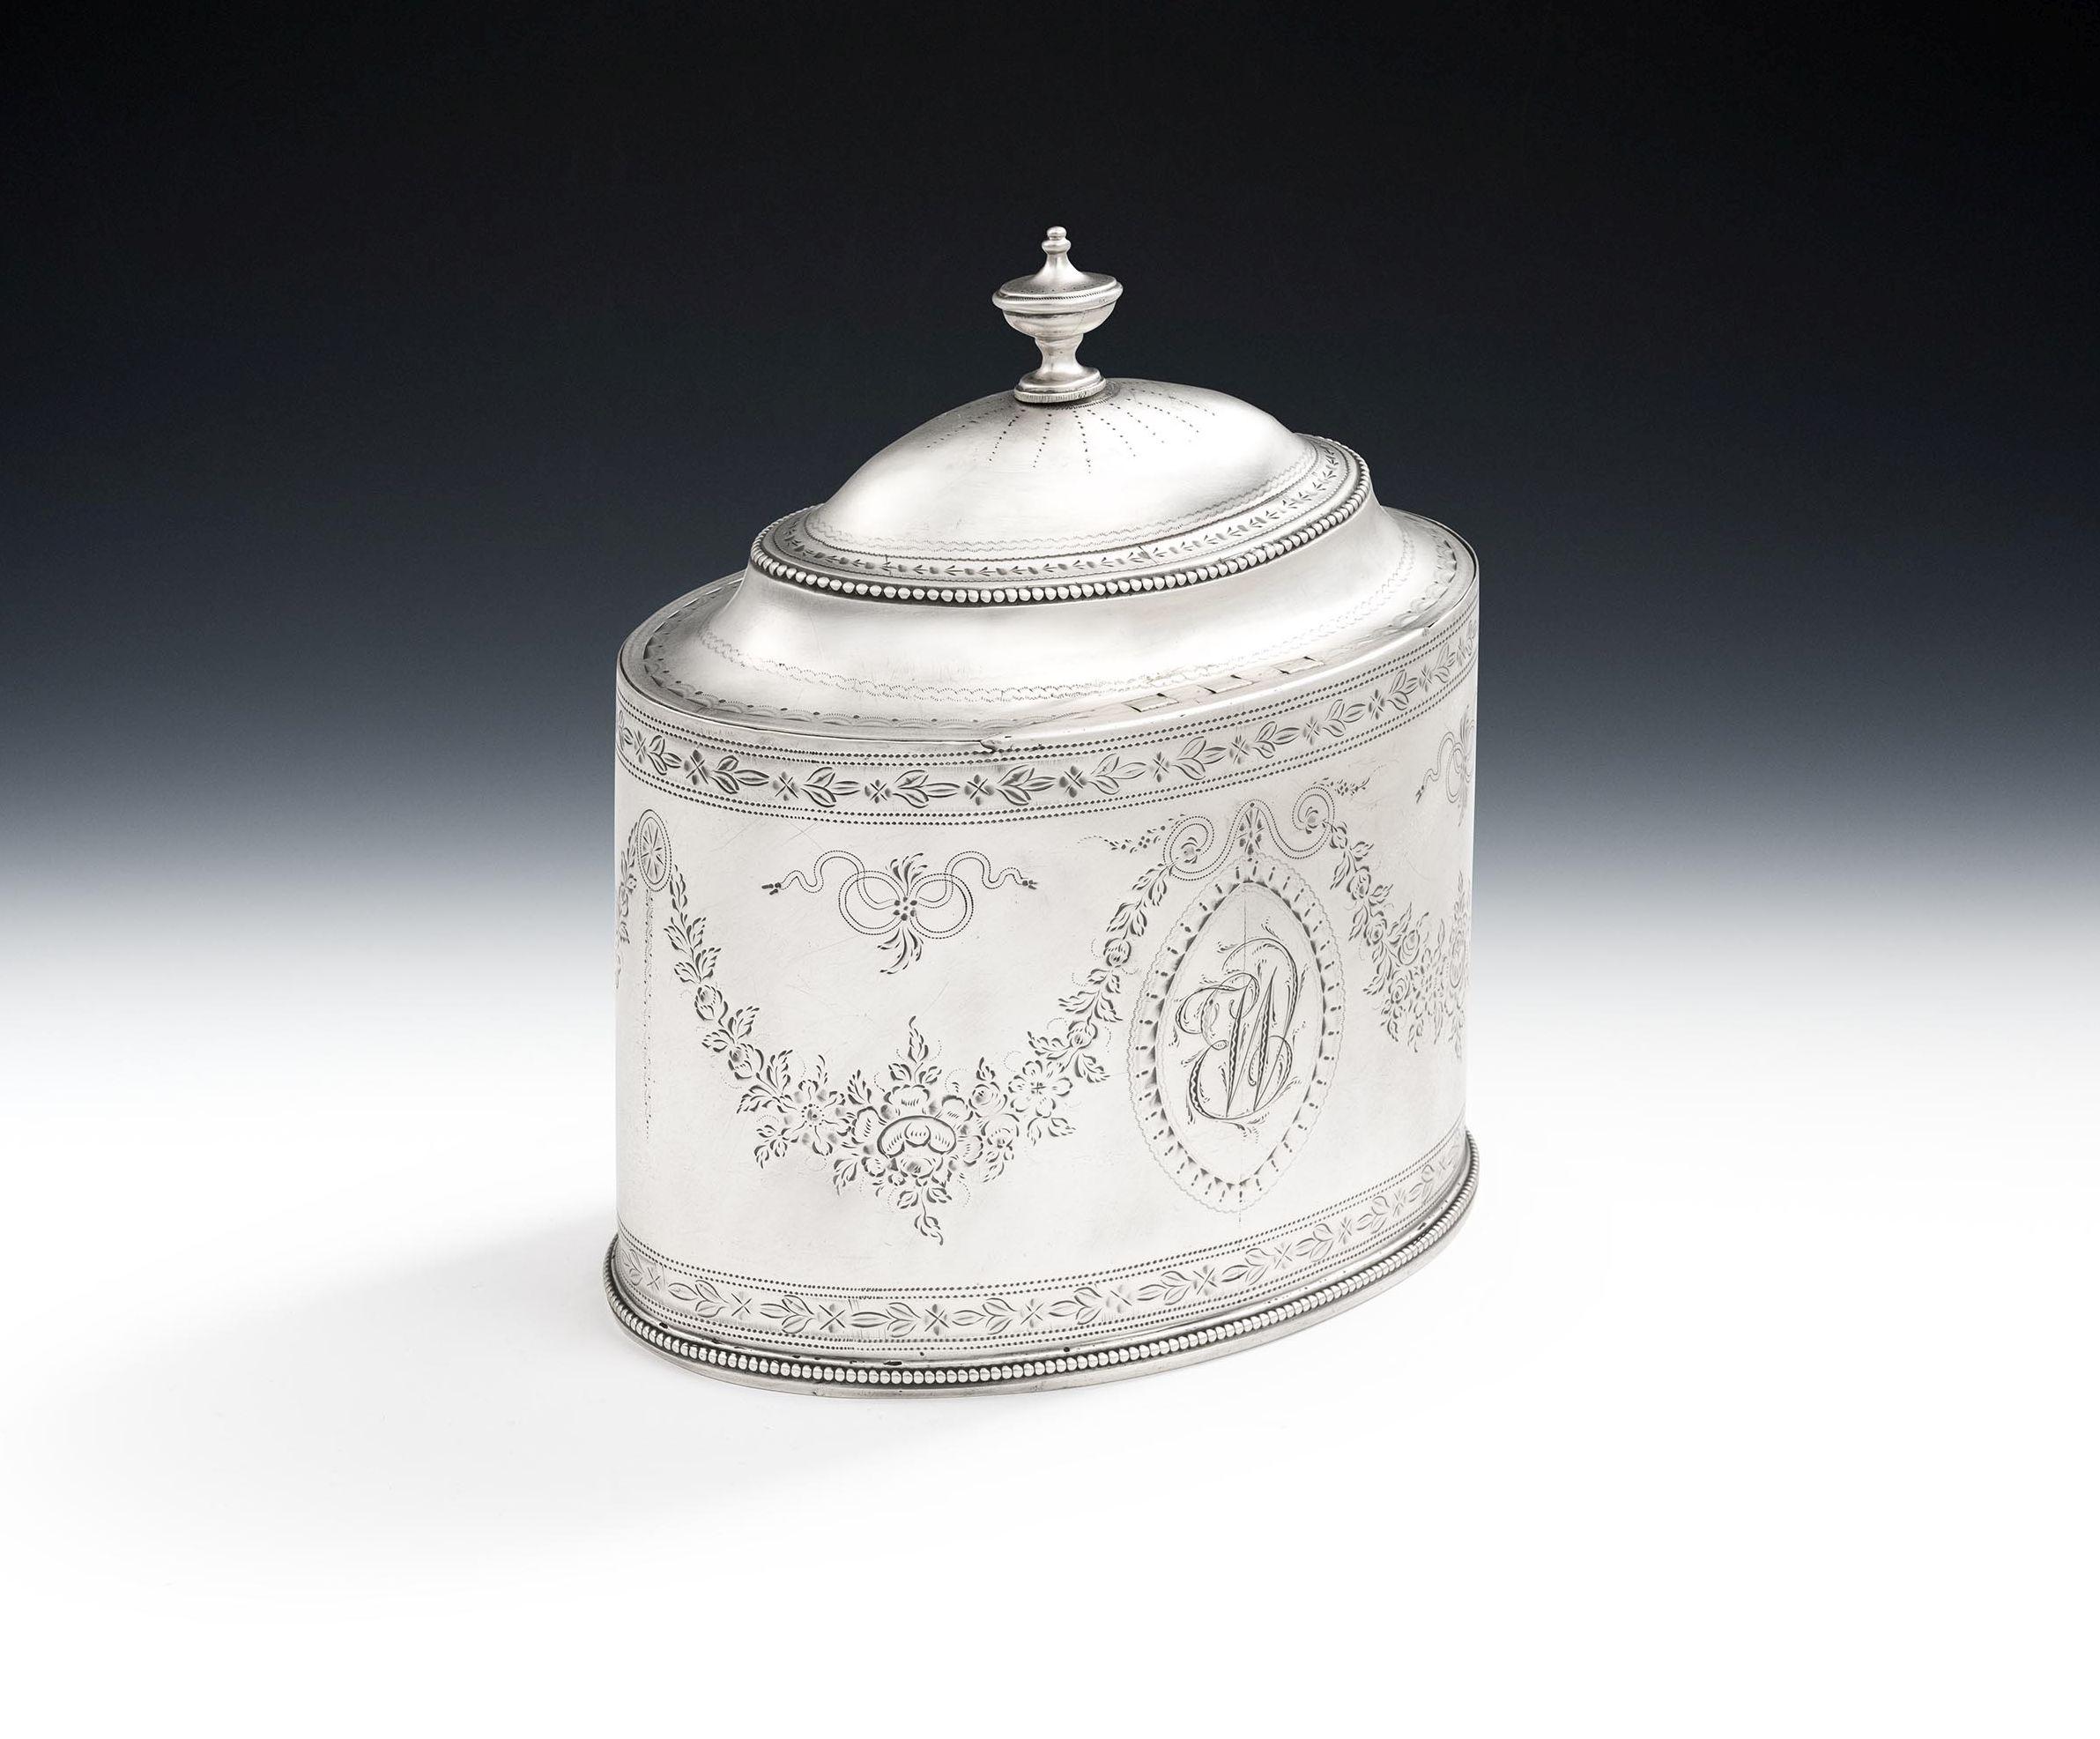 A very rare and fine George III Tea Caddy made in London in 1787 by Hester Bateman.

The Tea Caddy is modelled in a known design from the Hester Bateman workshops.  This fine example has an oval form with a beaded band at the base.  The main body